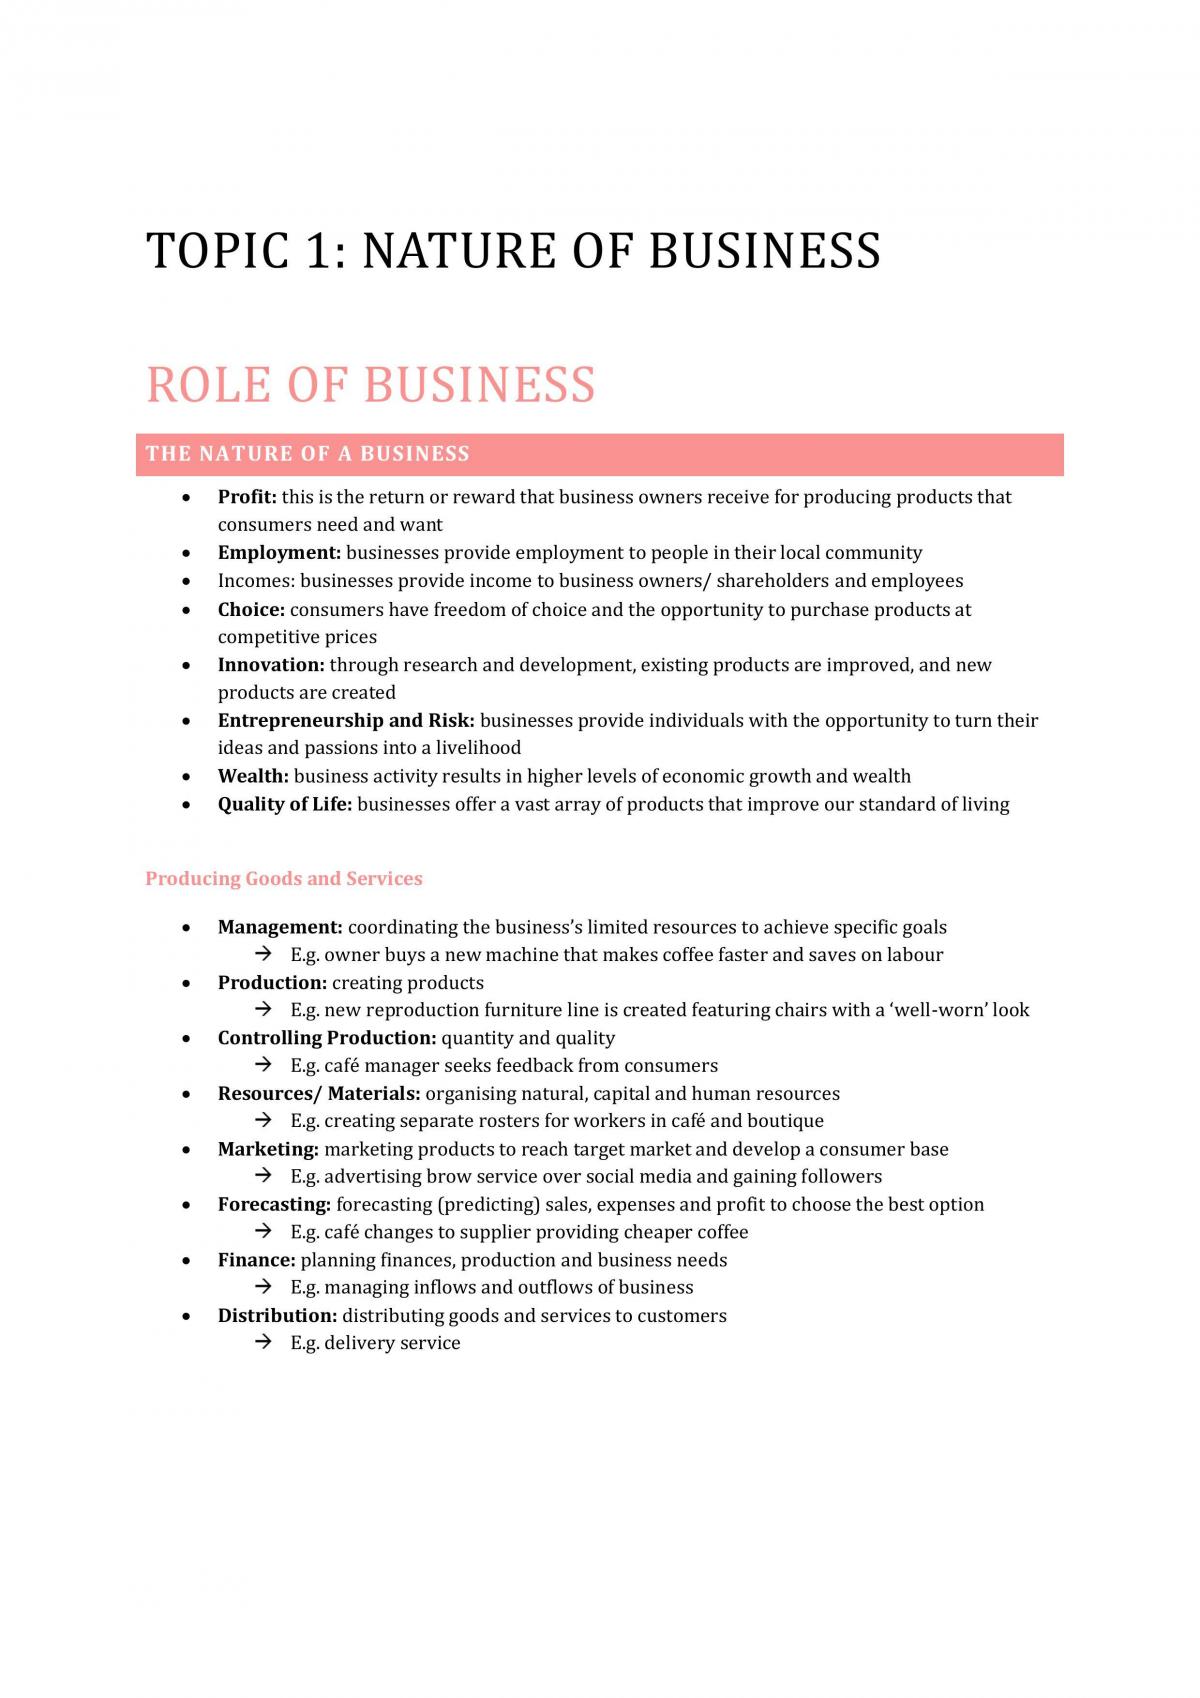 Business Studies Notes - Topic 1: Nature of Business - Page 1